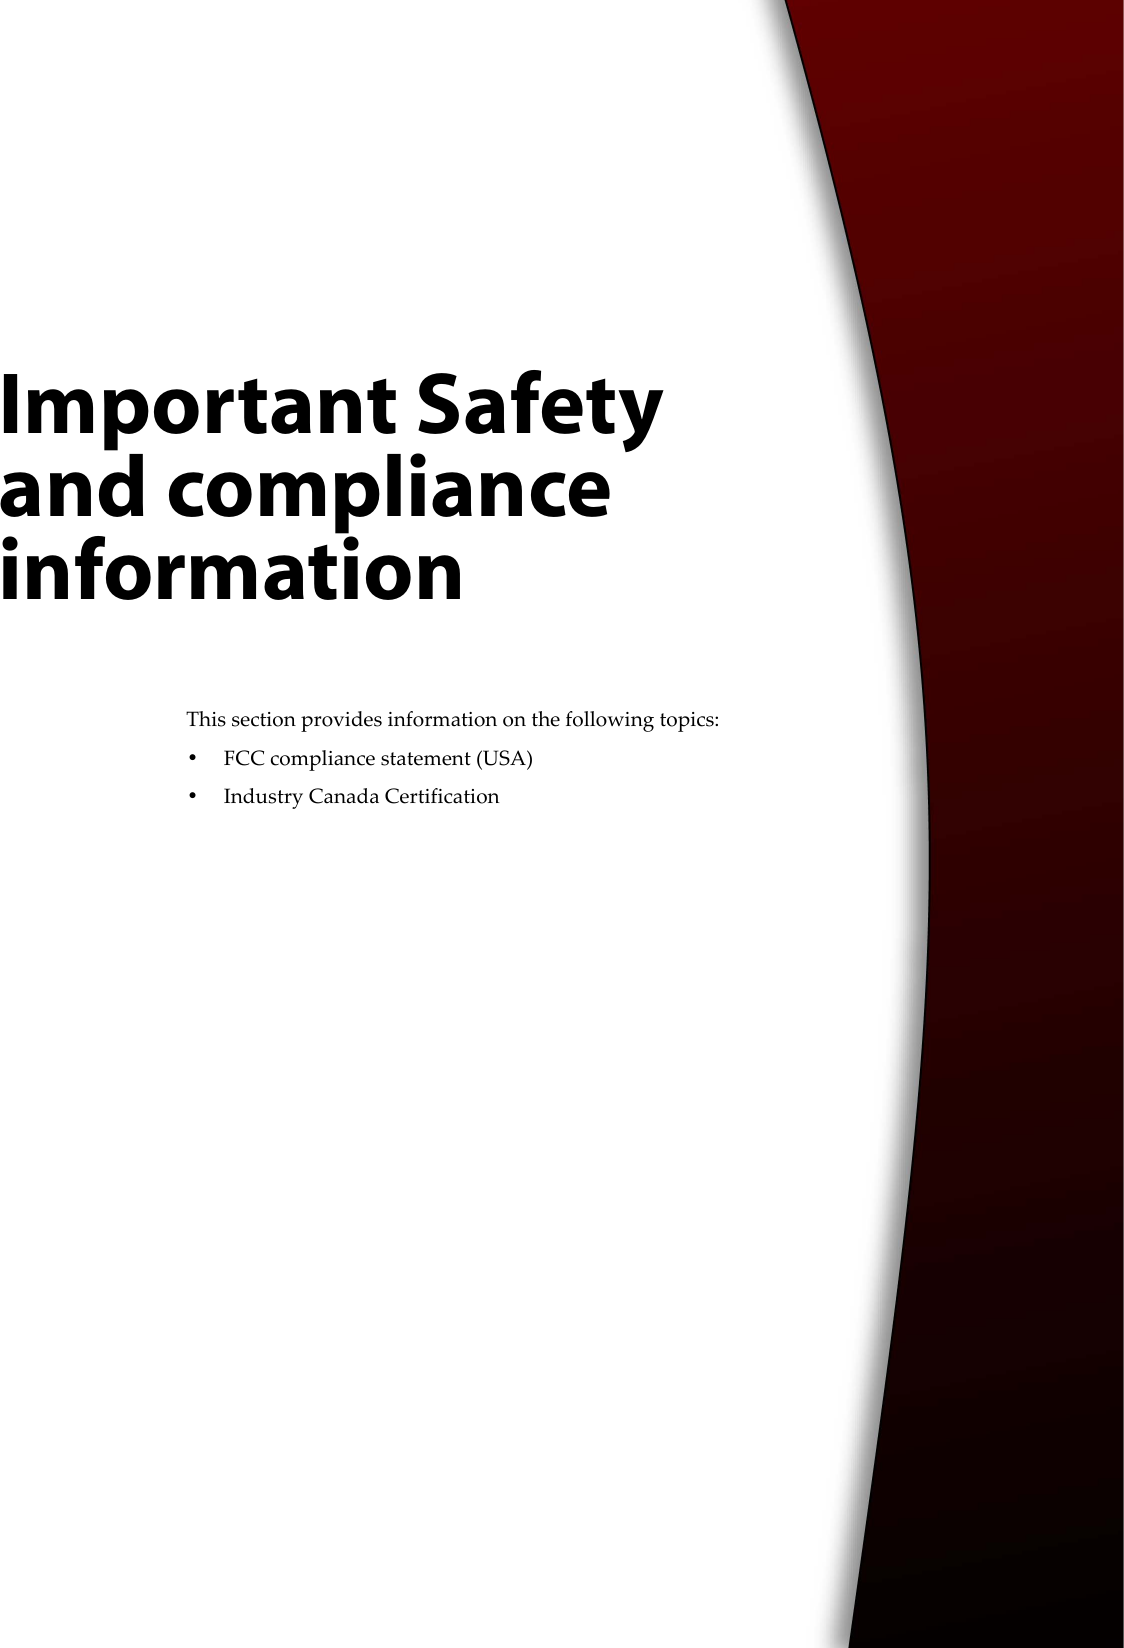 Important Safety and compliance informationThis section provides information on the following topics:•FCC compliance statement (USA)•Industry Canada Certification